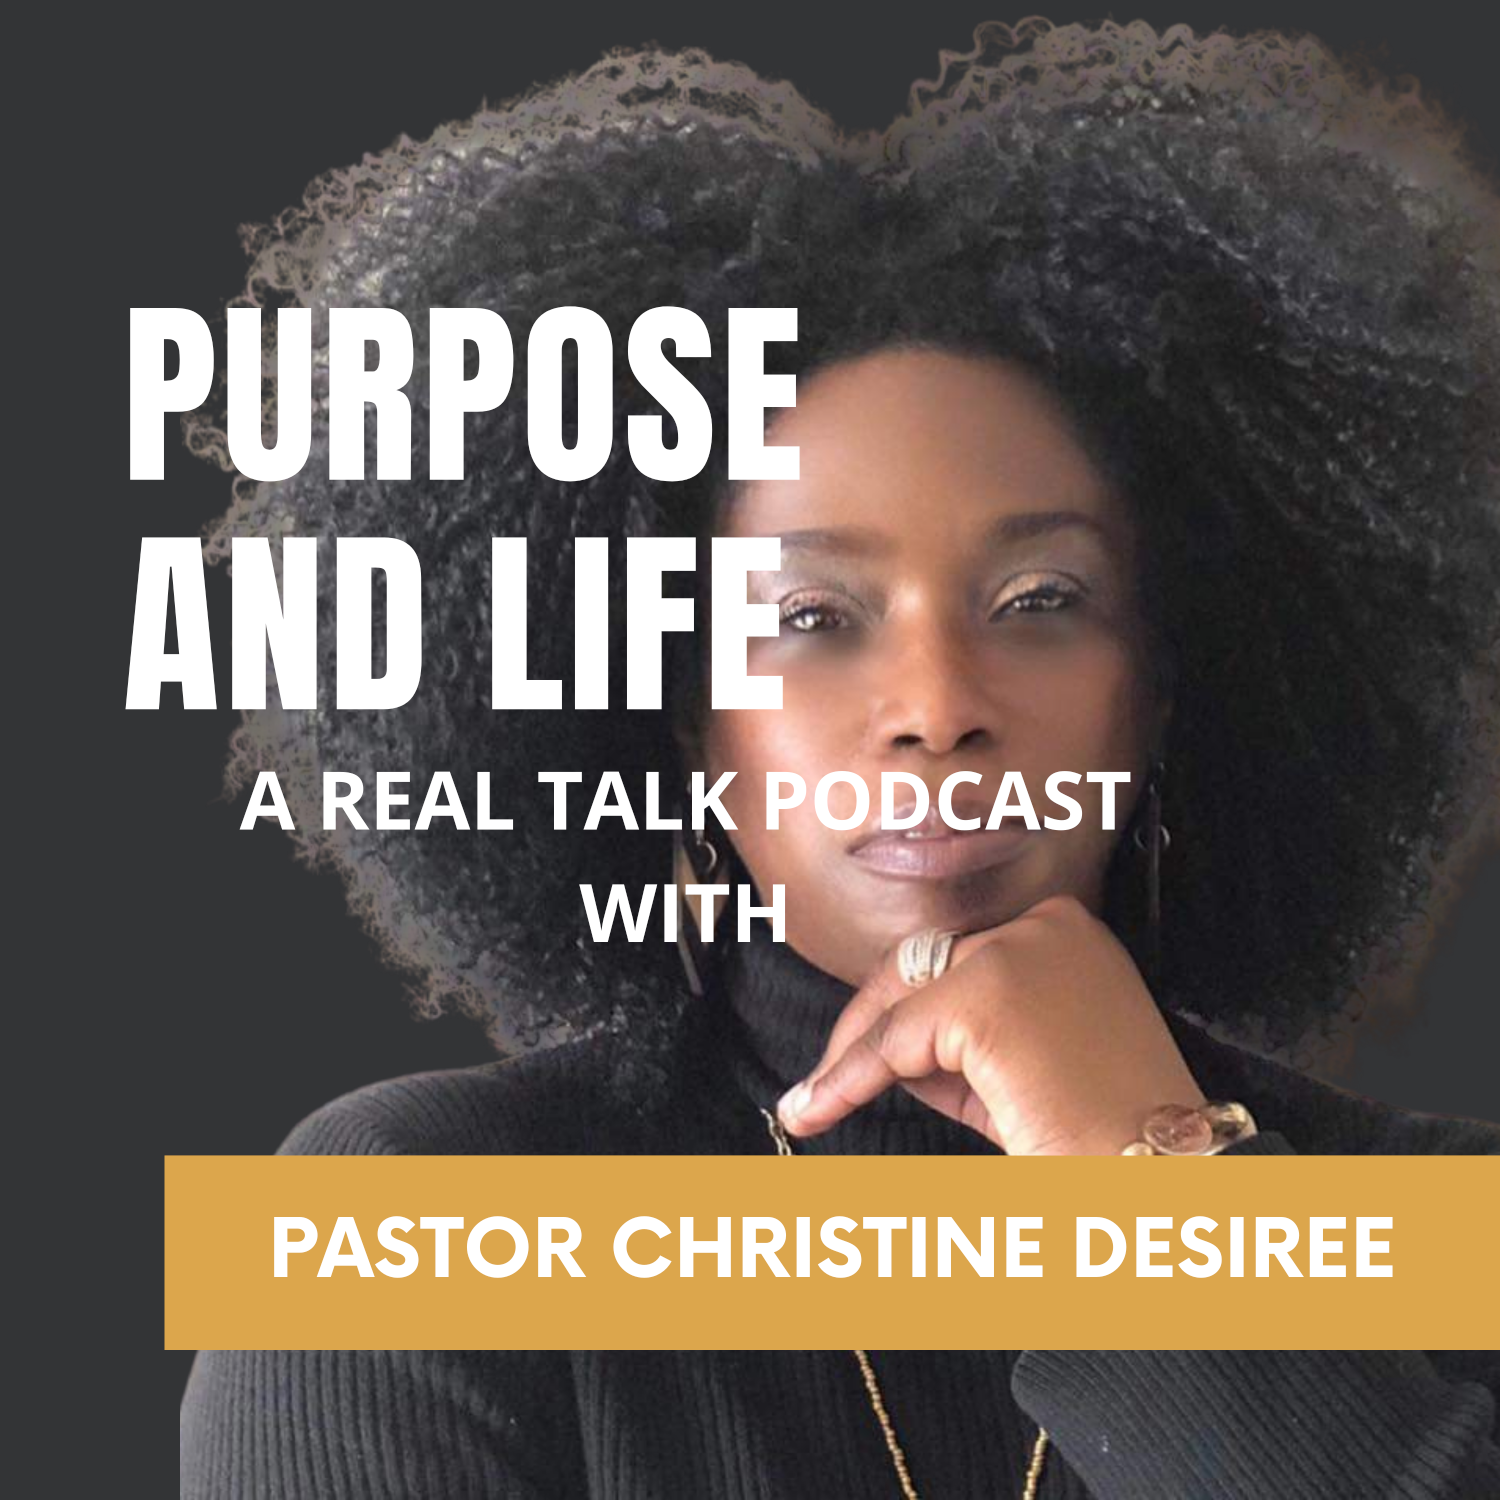 Artwork for podcast PURPOSE AND LIFE WITH PASTOR CHRISTINE DESIREE